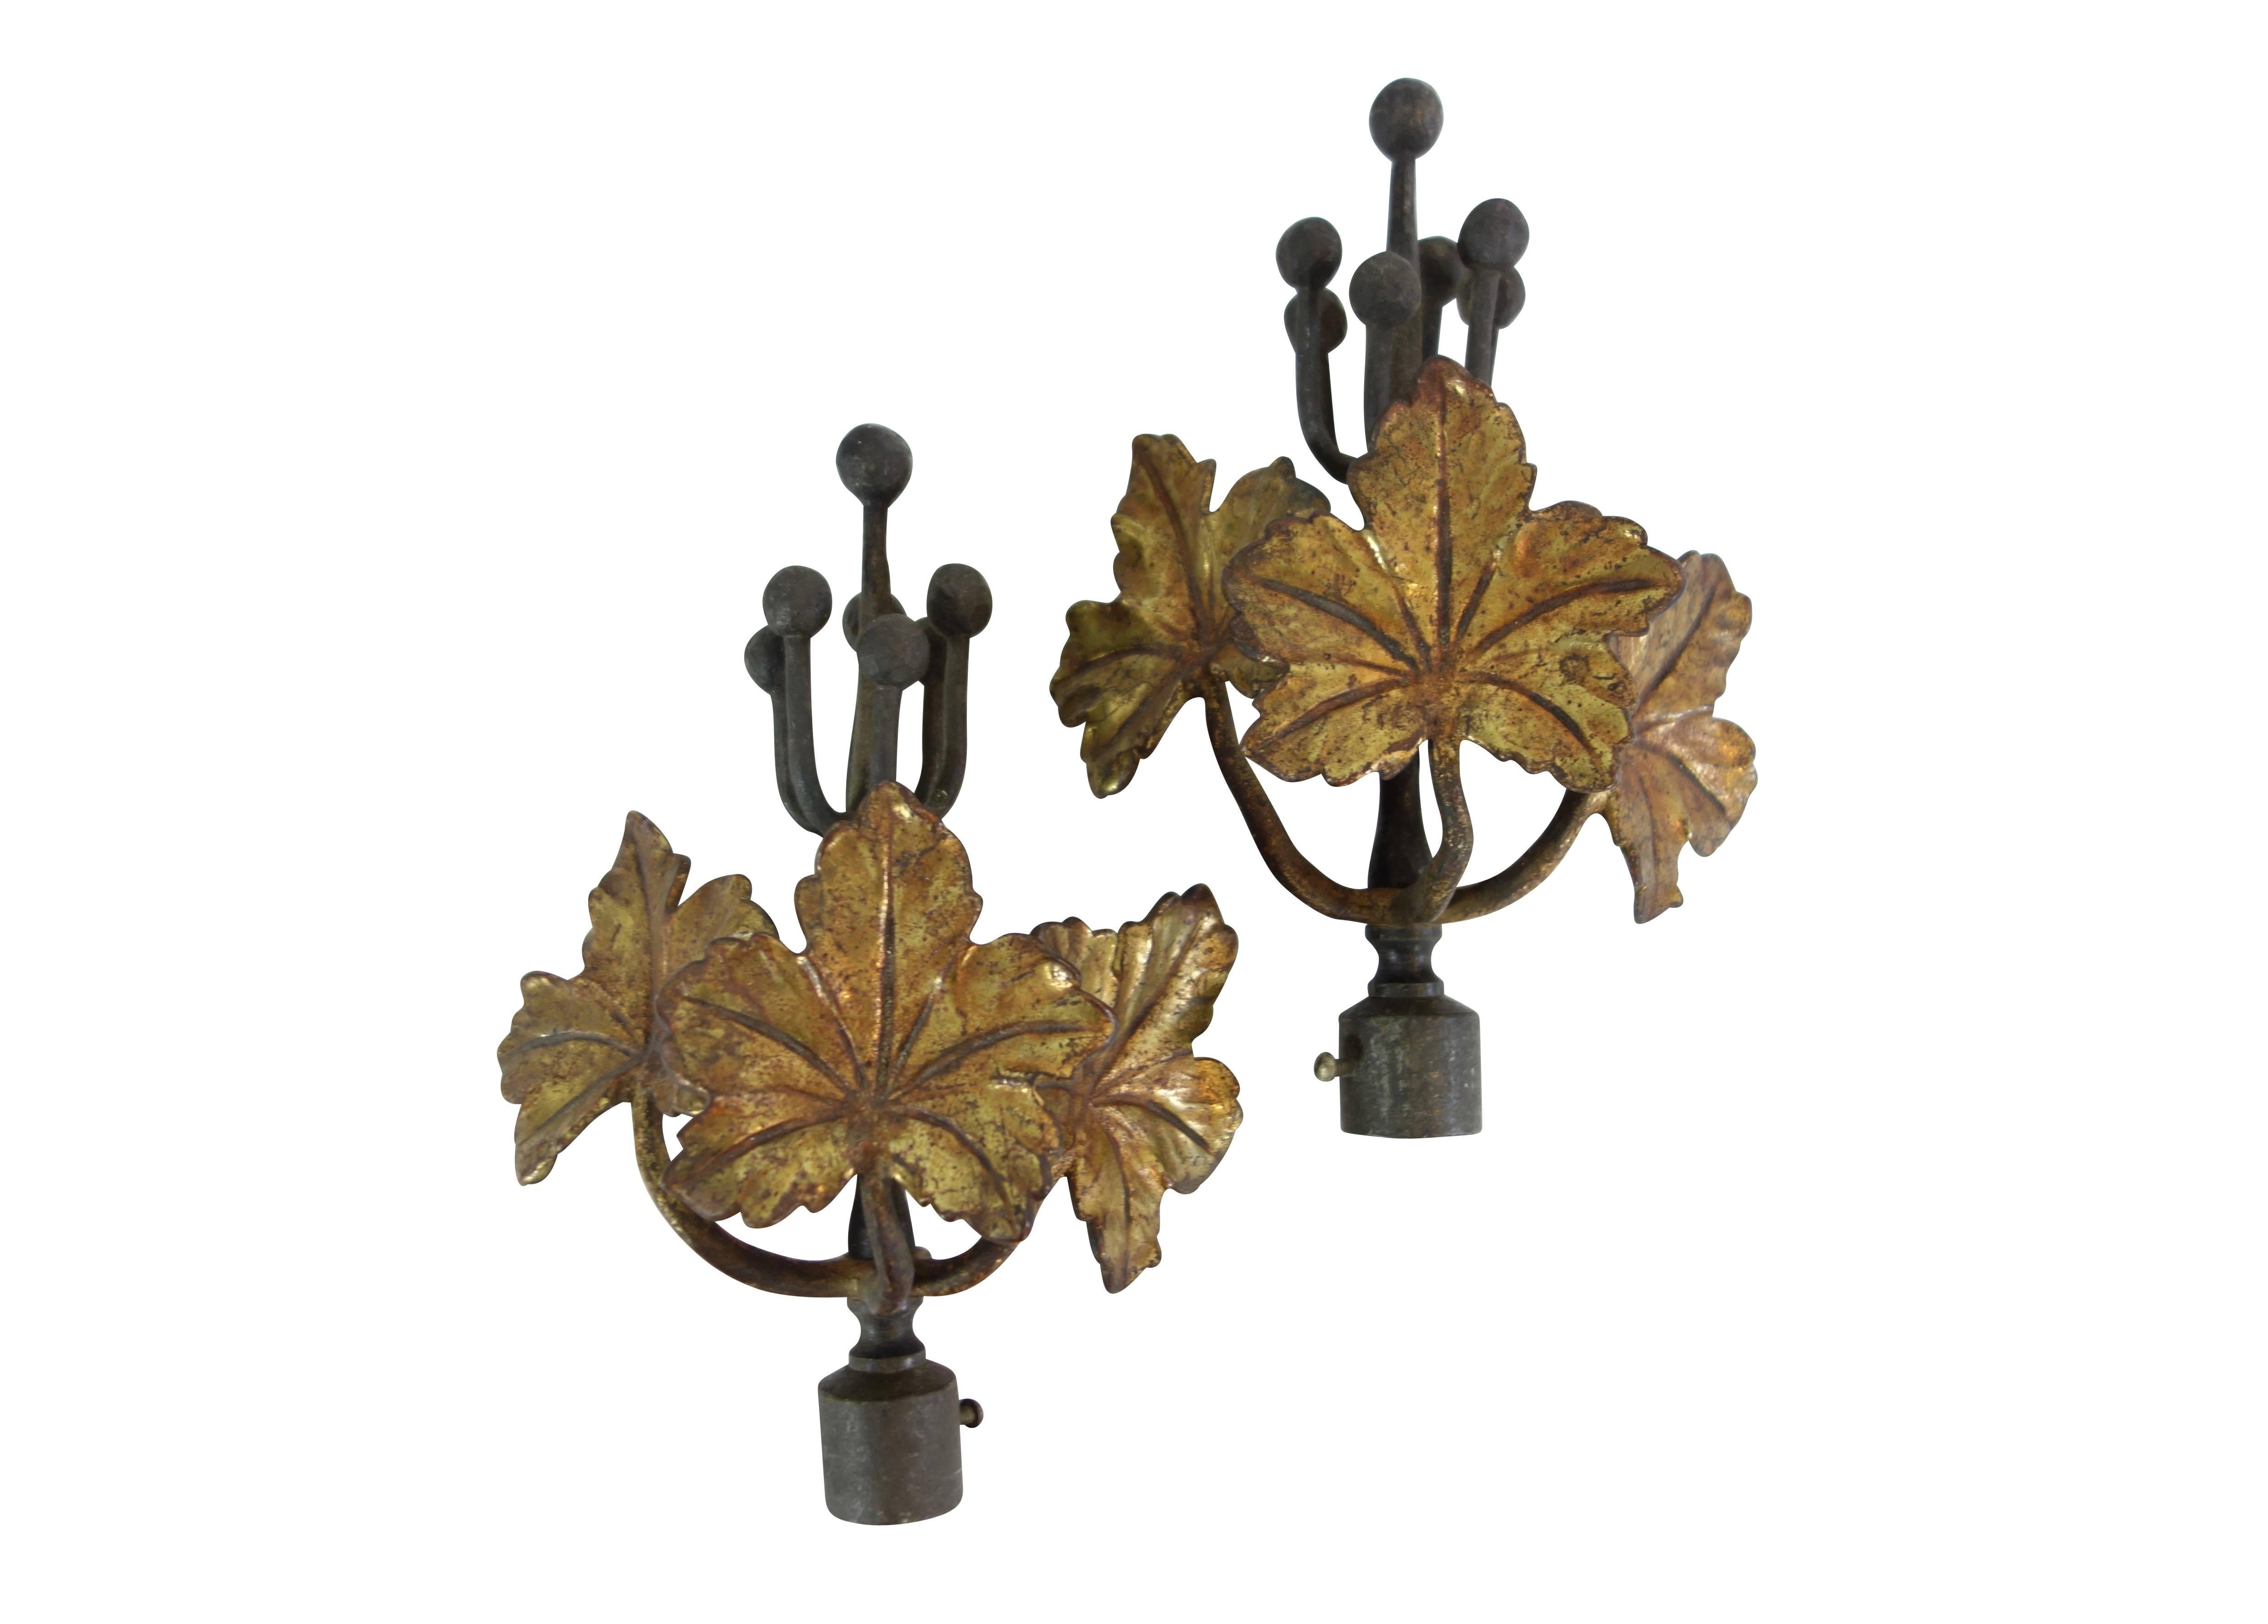 This is a beautiful set of hand-forged steel and bronze ivy curtain hardware. The set includes two curtain tie backs, and two curtain rod adornments. 

Measure: Tie back pieces (top) 6" wide x 5" deep x 9.5 " high

rod adornments